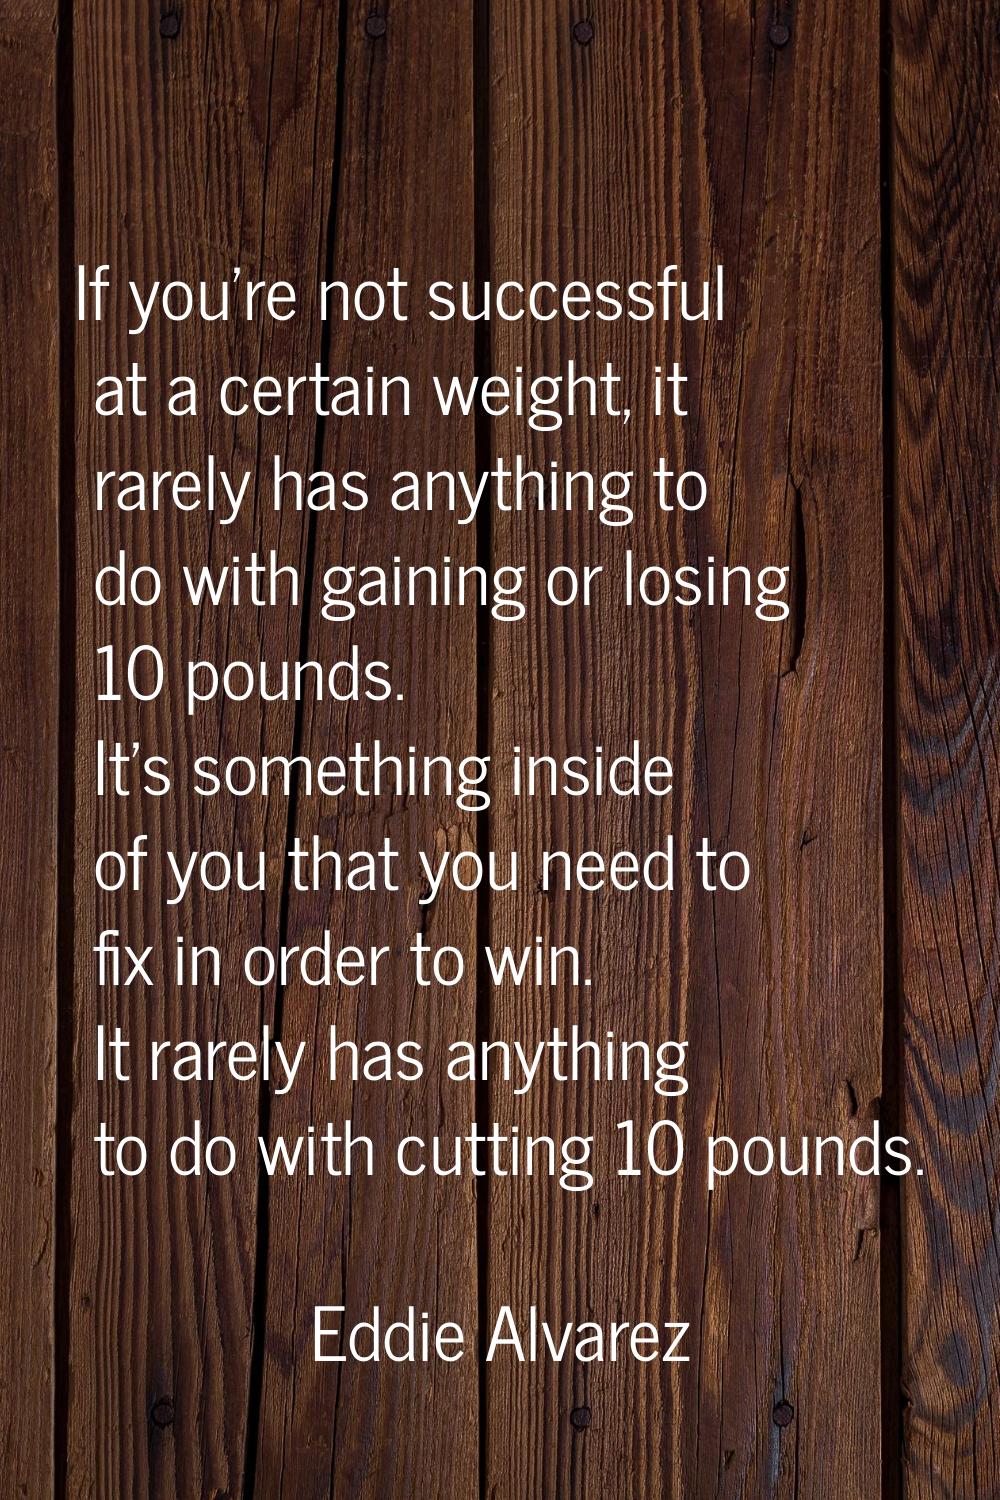 If you're not successful at a certain weight, it rarely has anything to do with gaining or losing 1